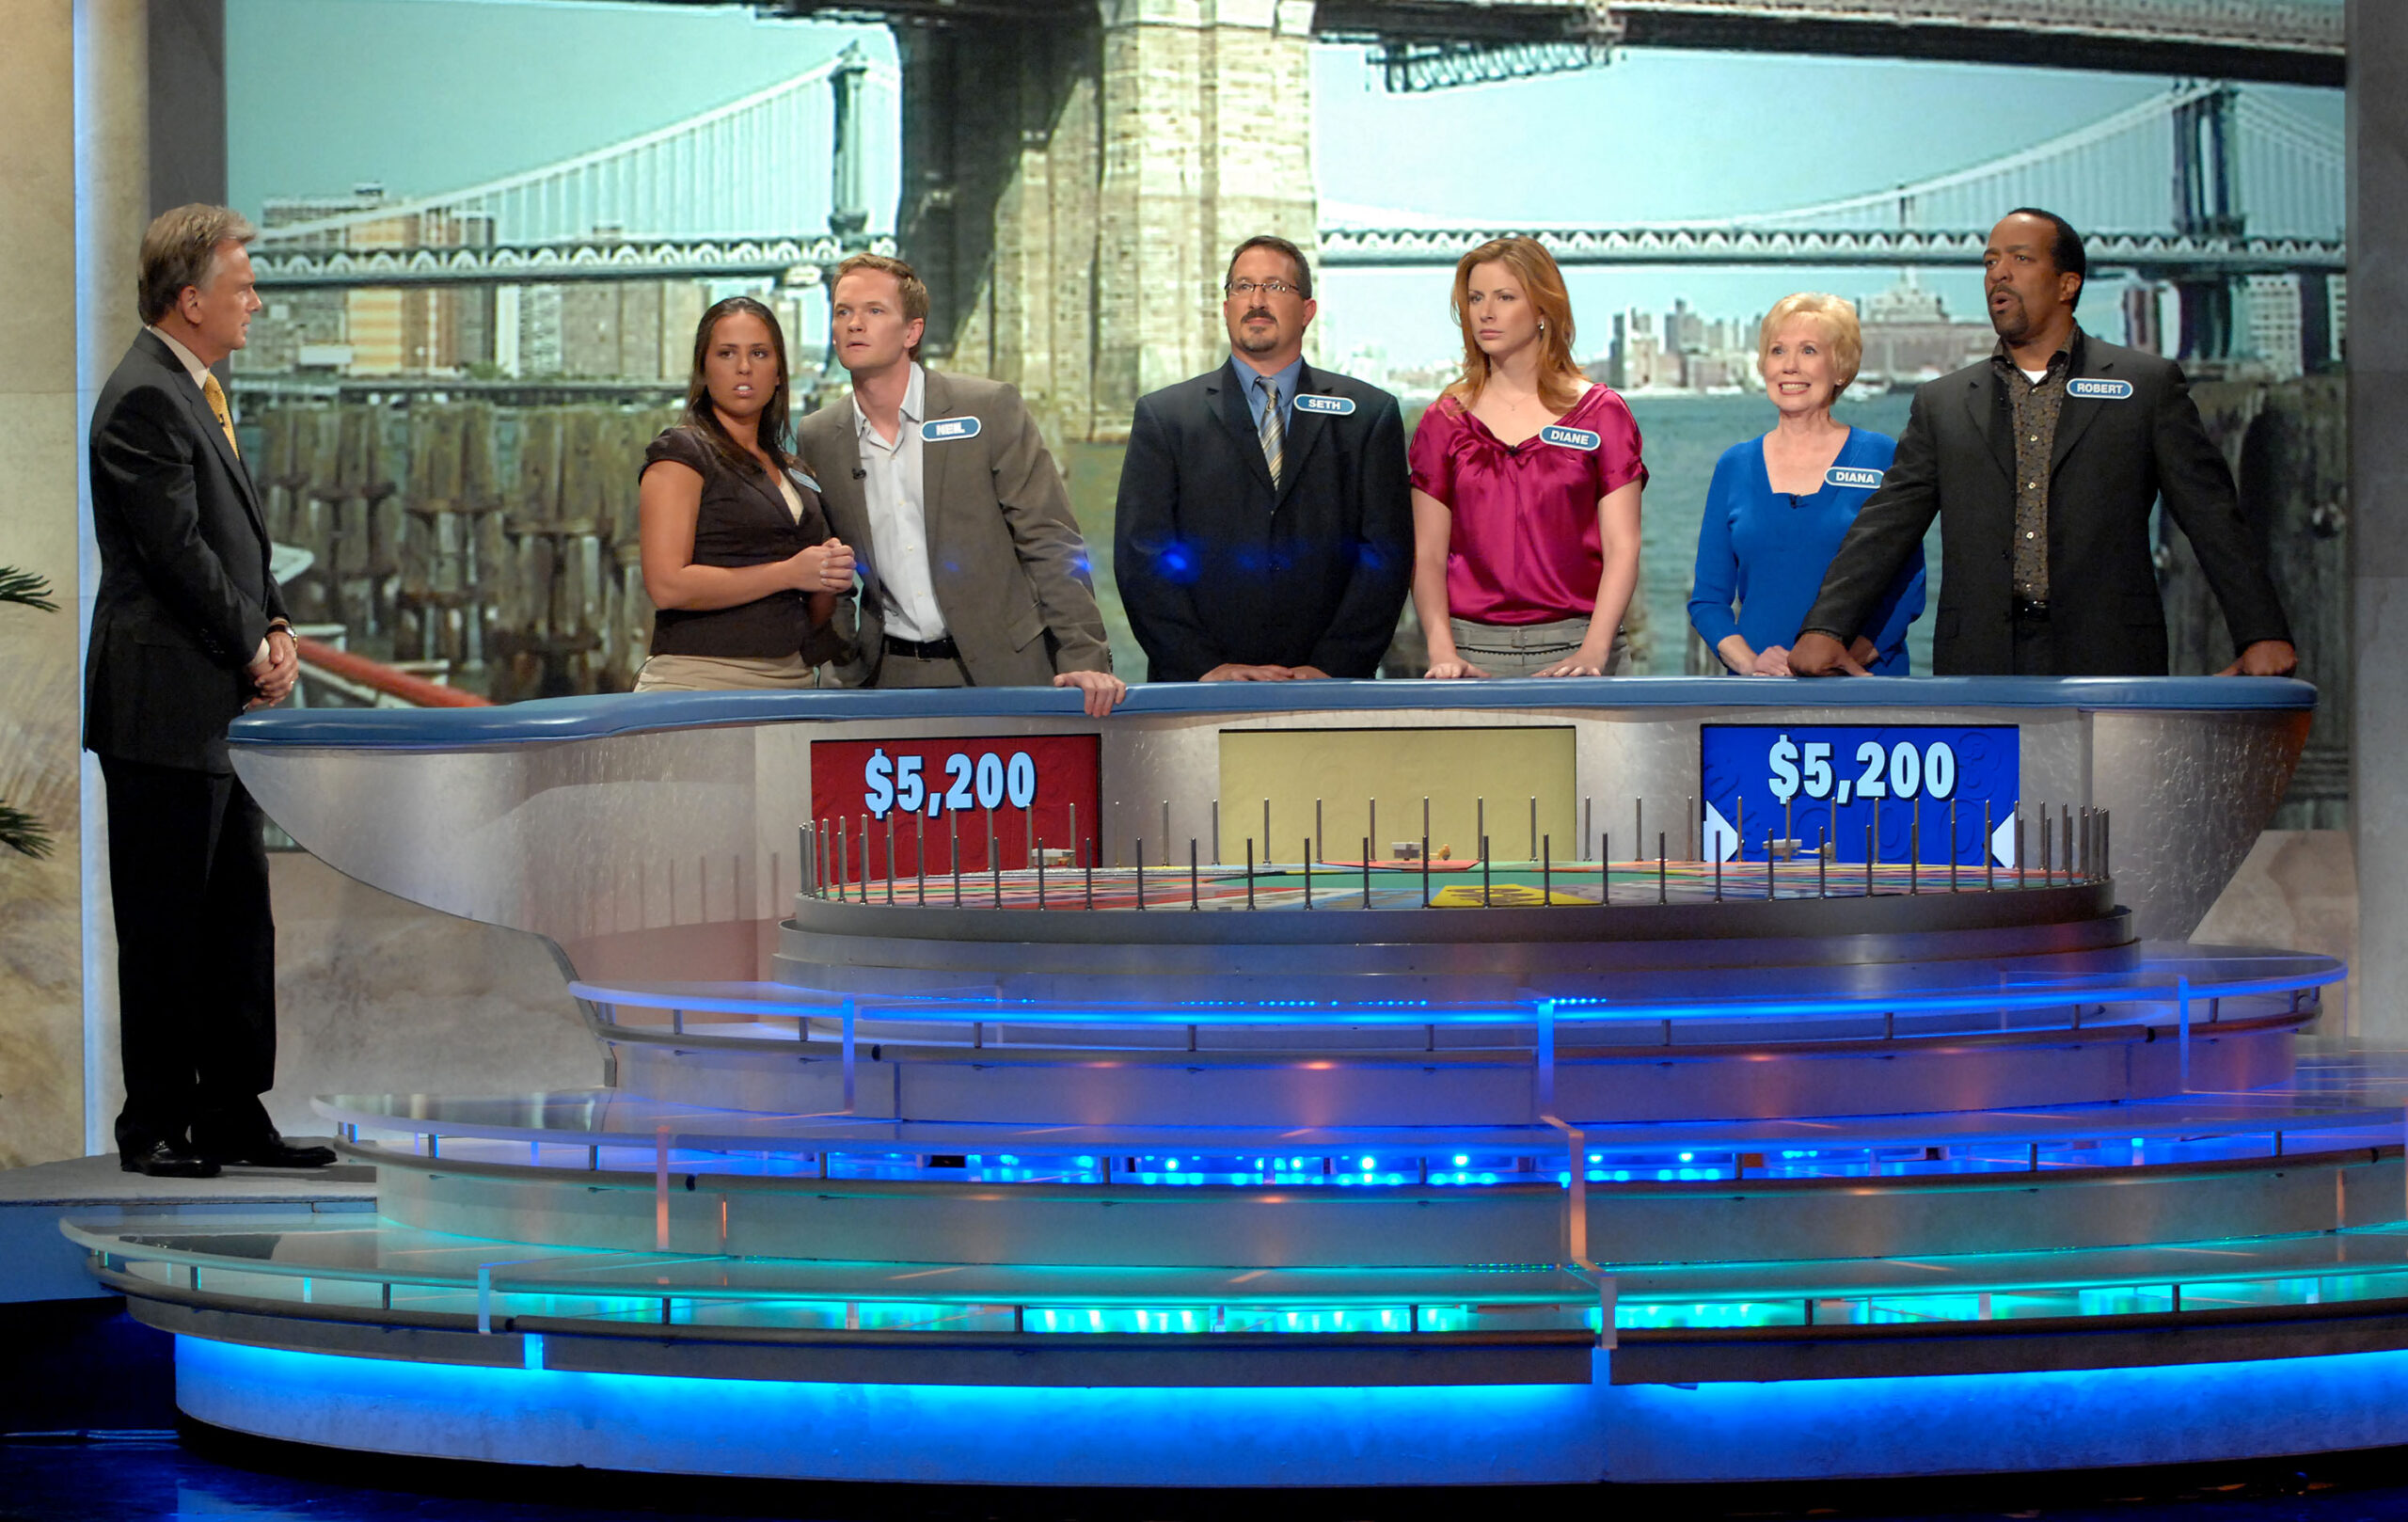 Wheel of Fortune host and contestants